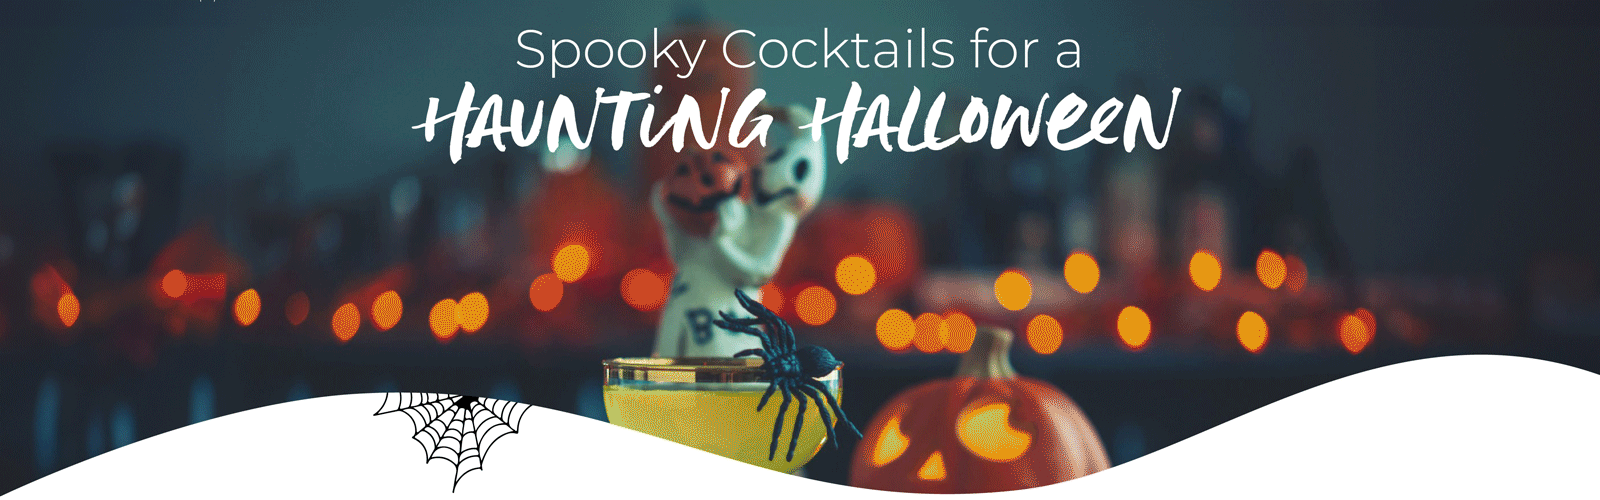 Spooky Cocktails for a Haunting Halloween